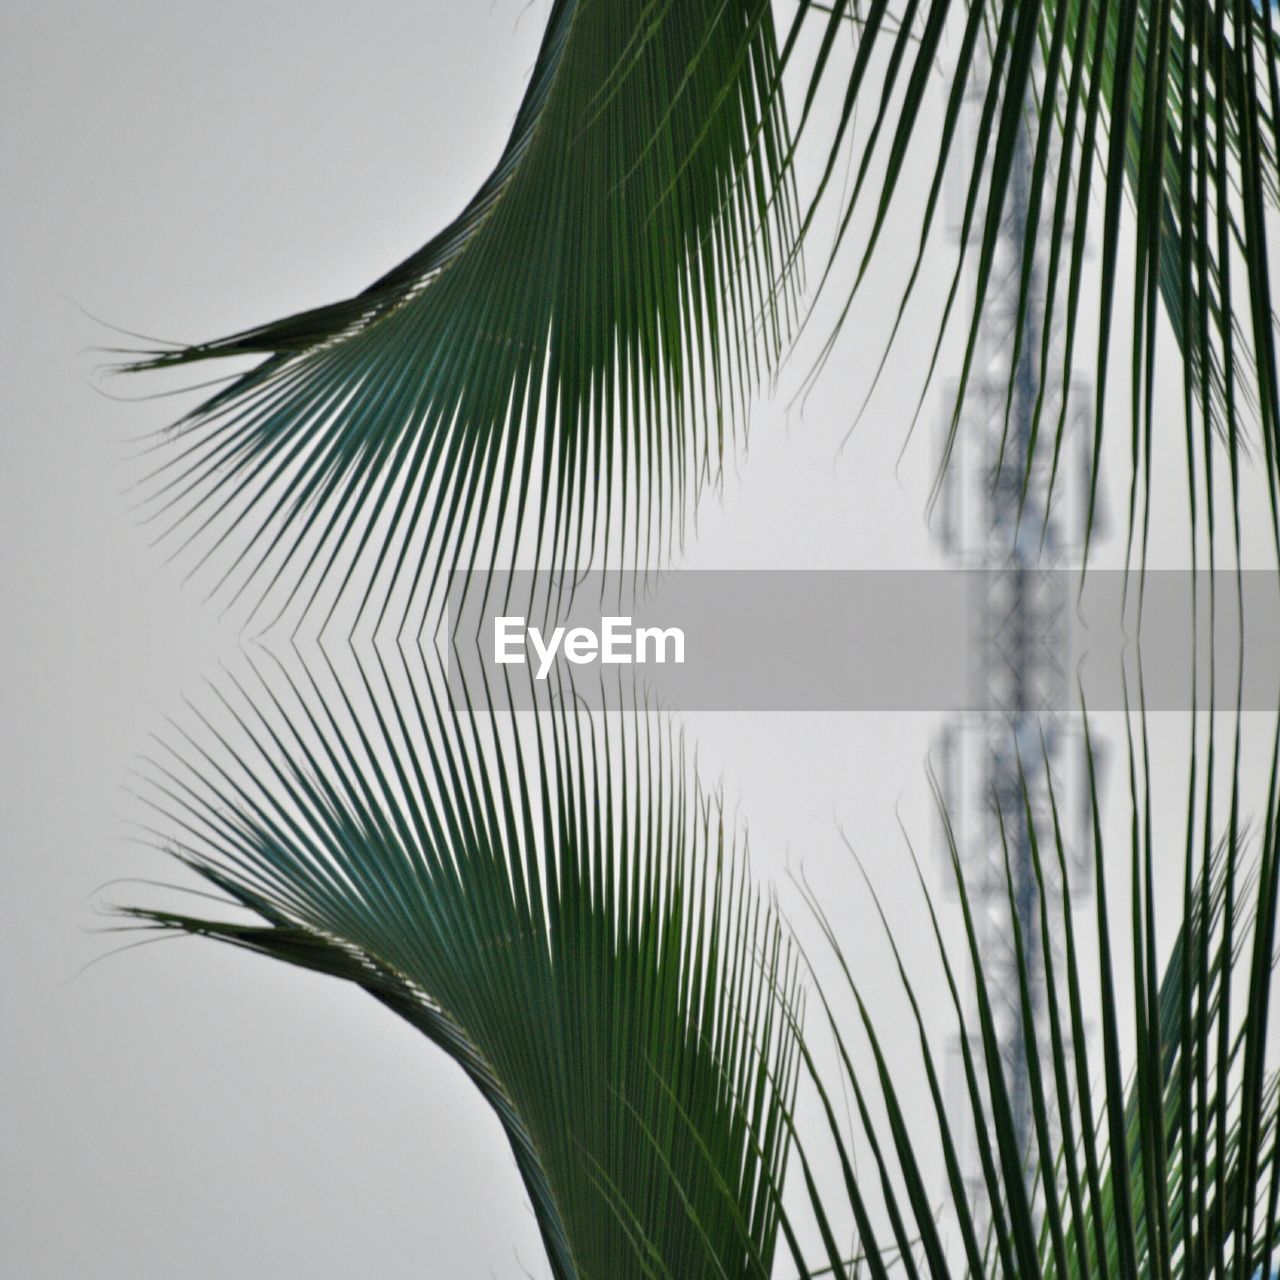 CLOSE-UP OF PALM TREE BRANCH AGAINST SKY